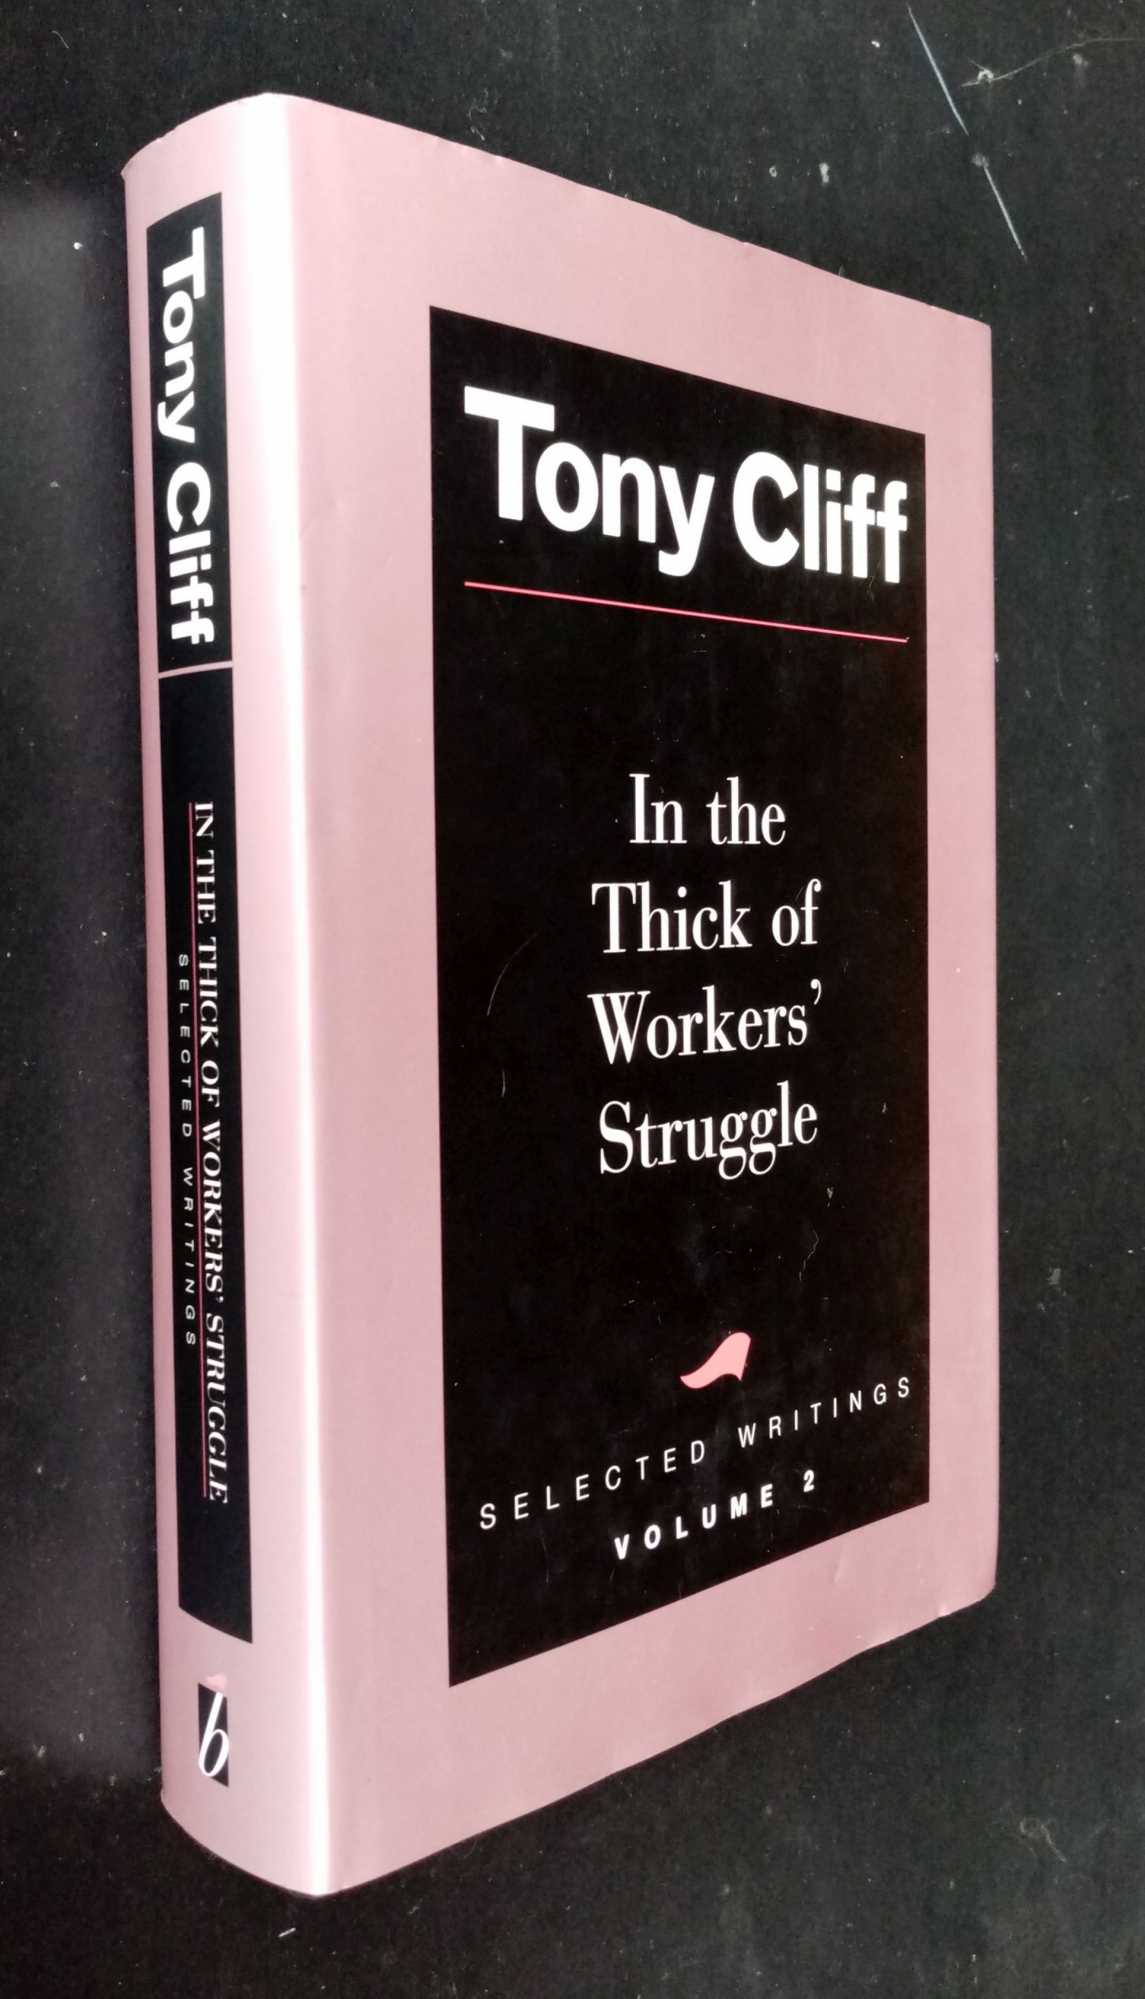 Tony Cliff - In The Thick Of Workers' Struggle  -  Selected Writings, Volume 2